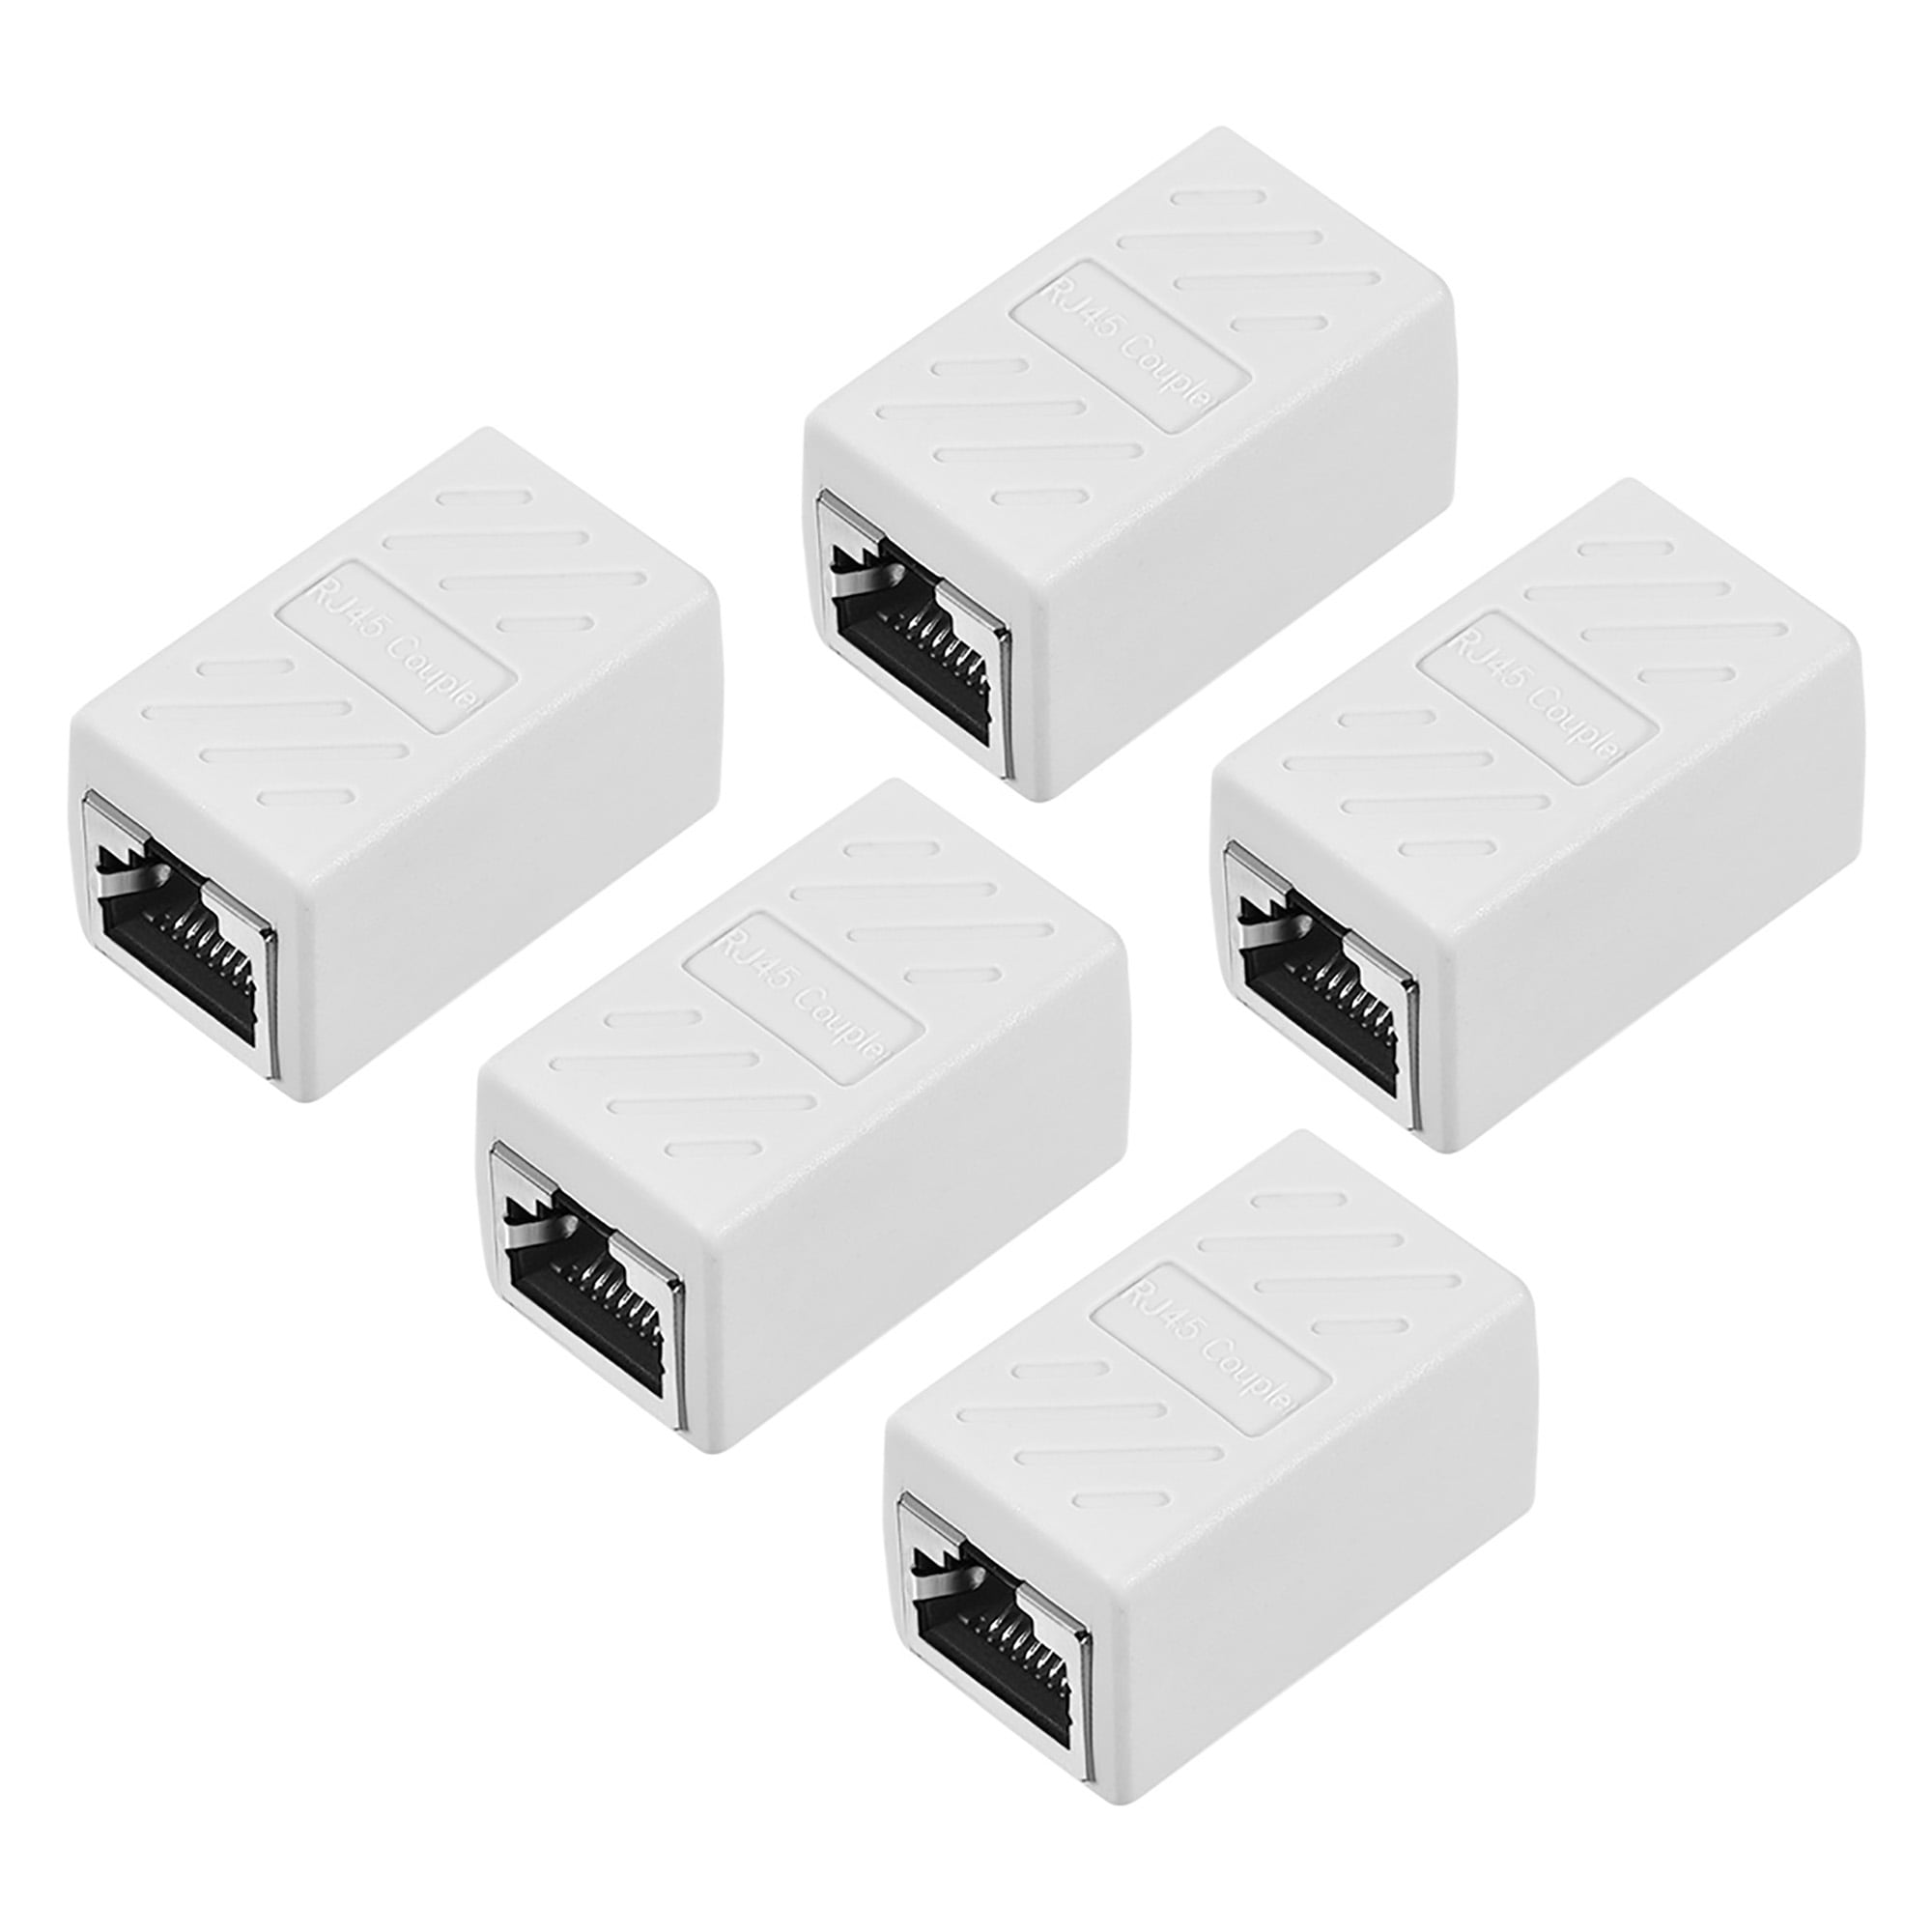 RJ45 Coupler,Ethernet Cable Extender,Female to Female Network Connectors for Cat7/Cat6/Cat5e/Cat5 2Pack, White + 20ft Ethernet Cable